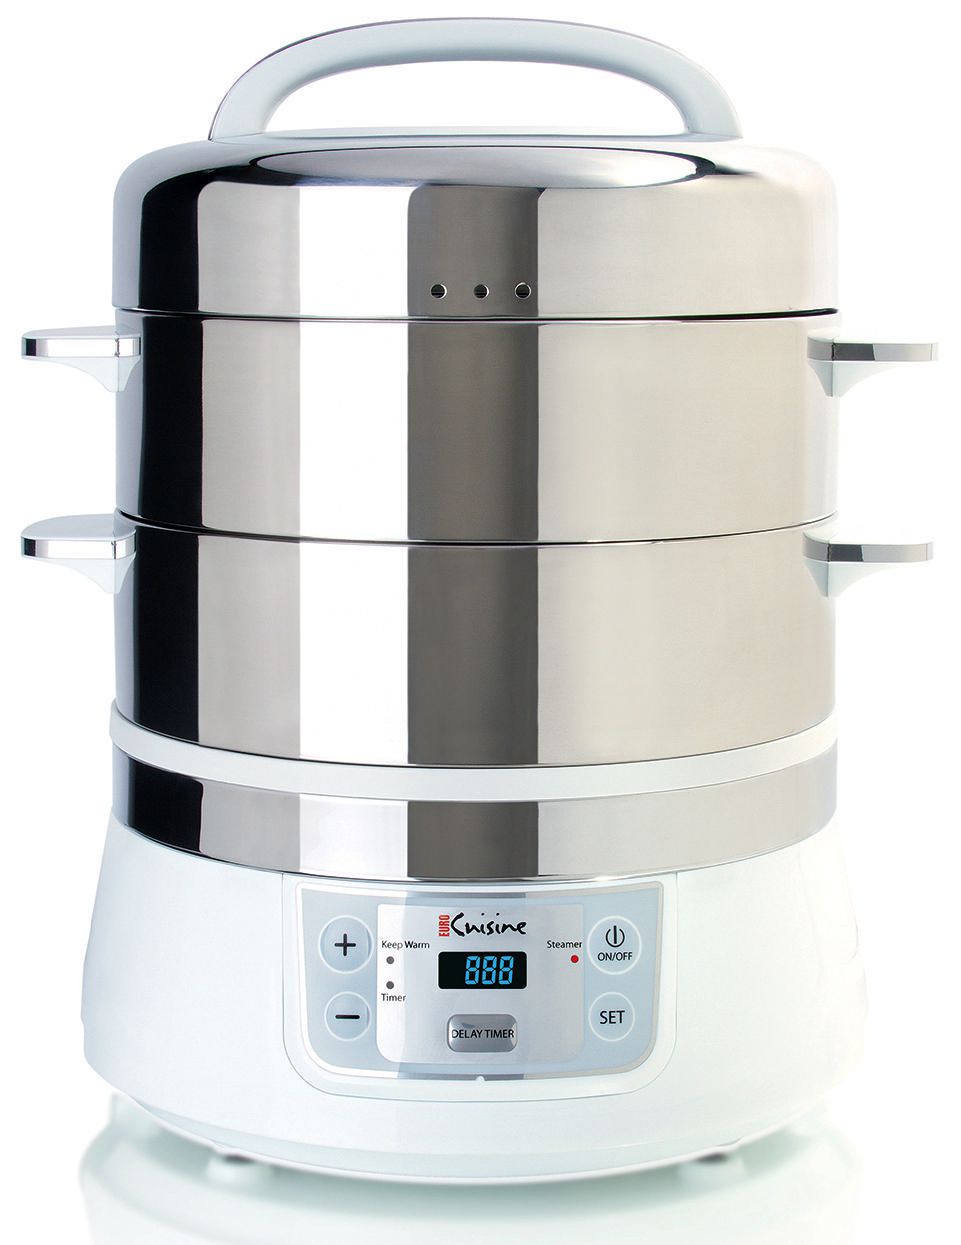 Euro Cuisine Stainless Steel 2-Tier Electric Steamer, FS2500